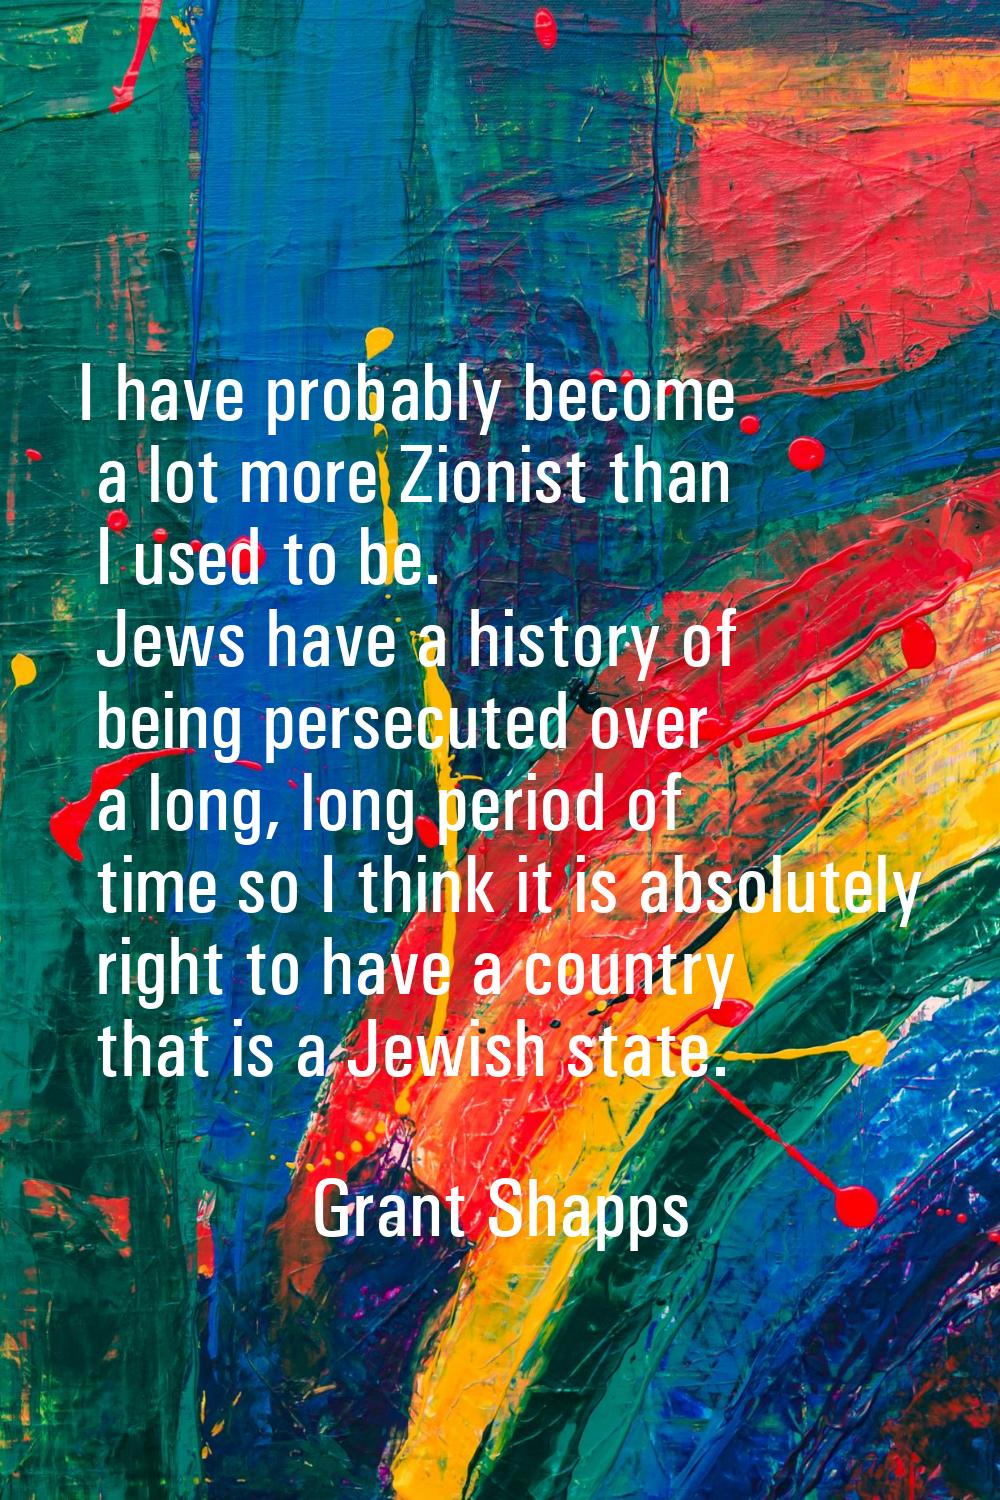 I have probably become a lot more Zionist than I used to be. Jews have a history of being persecute